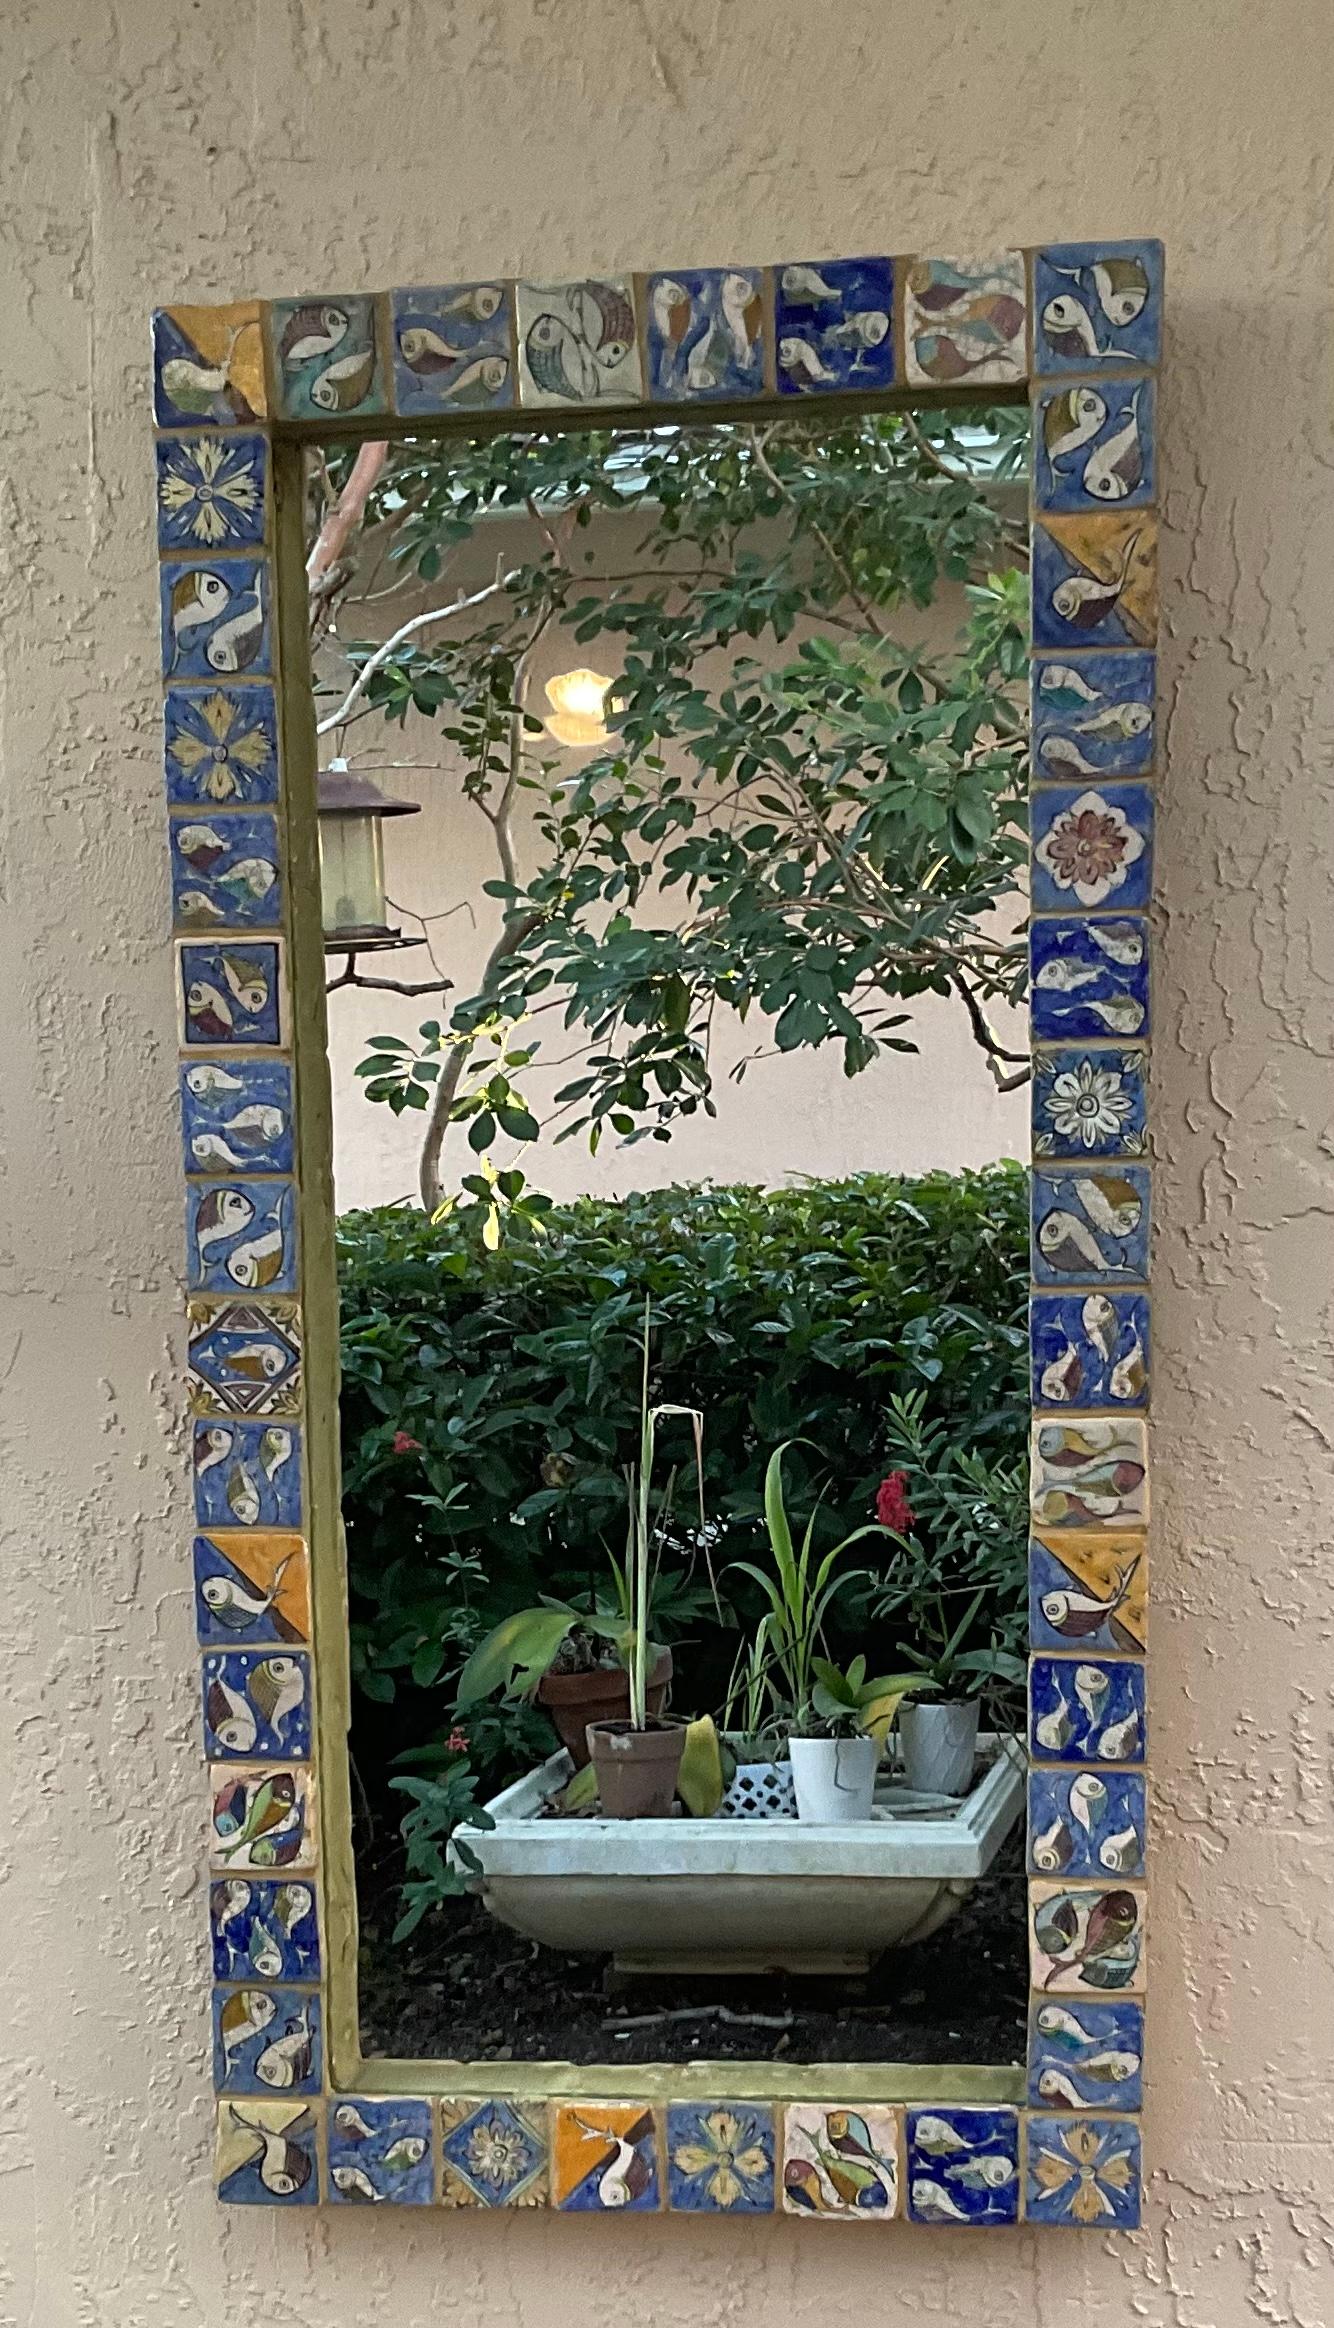 Beautiful large mirror made of hand-painted and glazed ceramic tiles, with exceptional motifs of vines flowers fish and geometric motifs great object of art for wall display.
In order to save on shipping cost the mirror will be shipped in two boxes